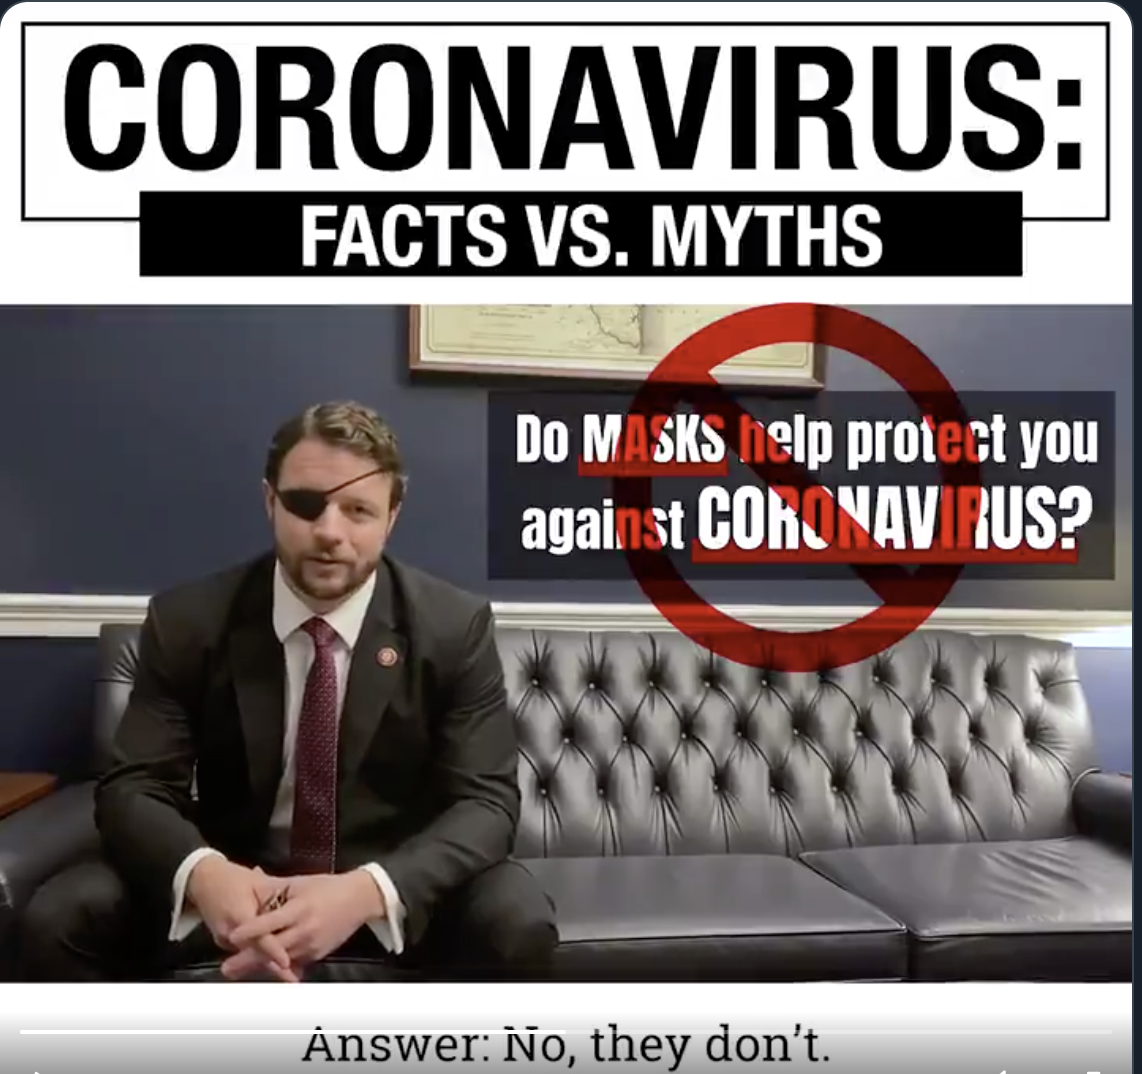 Lie 2: Dan claims he never insinuated masks don't work, and wants you to believe that he handled it just like Dr. Fauci.On March 7, his quote was "Do masks help protect you from coronavirus? Answer: No they don't...they're not effective at keeping out the virus." (4/8)